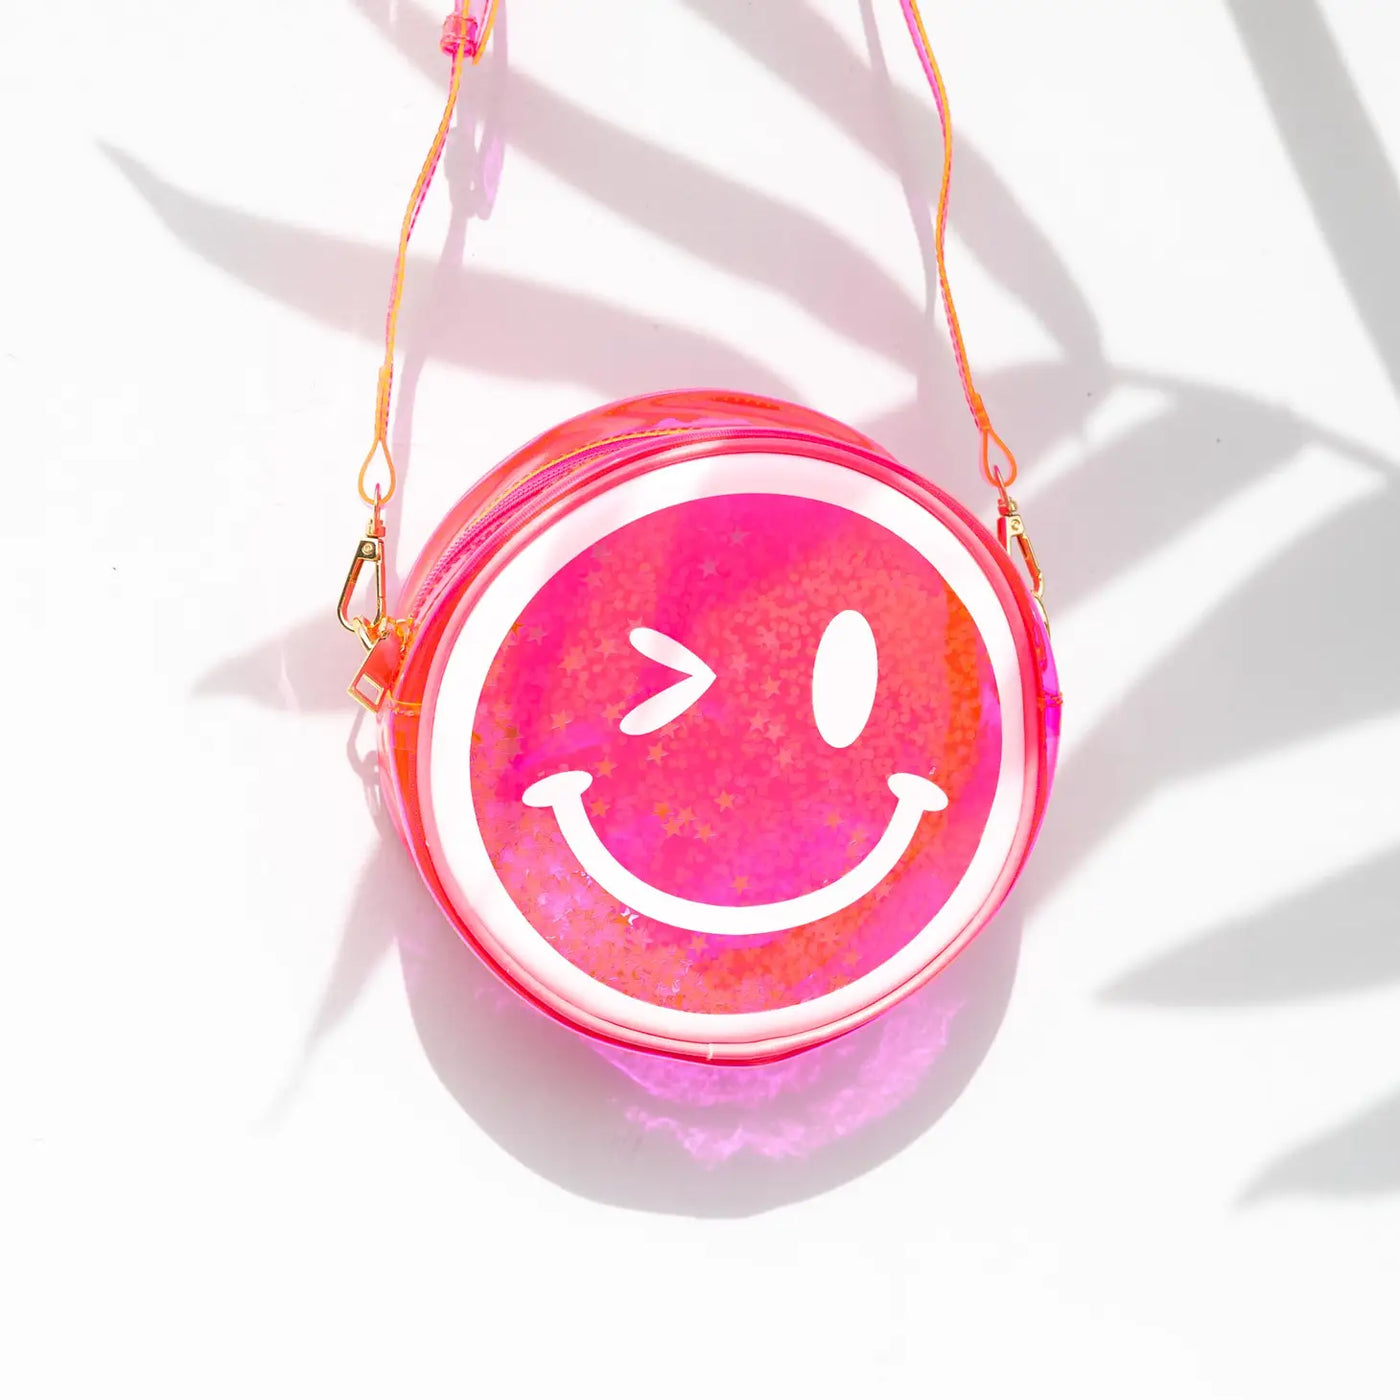 Jelly Smiley Face Handbags- Pick Your Color!